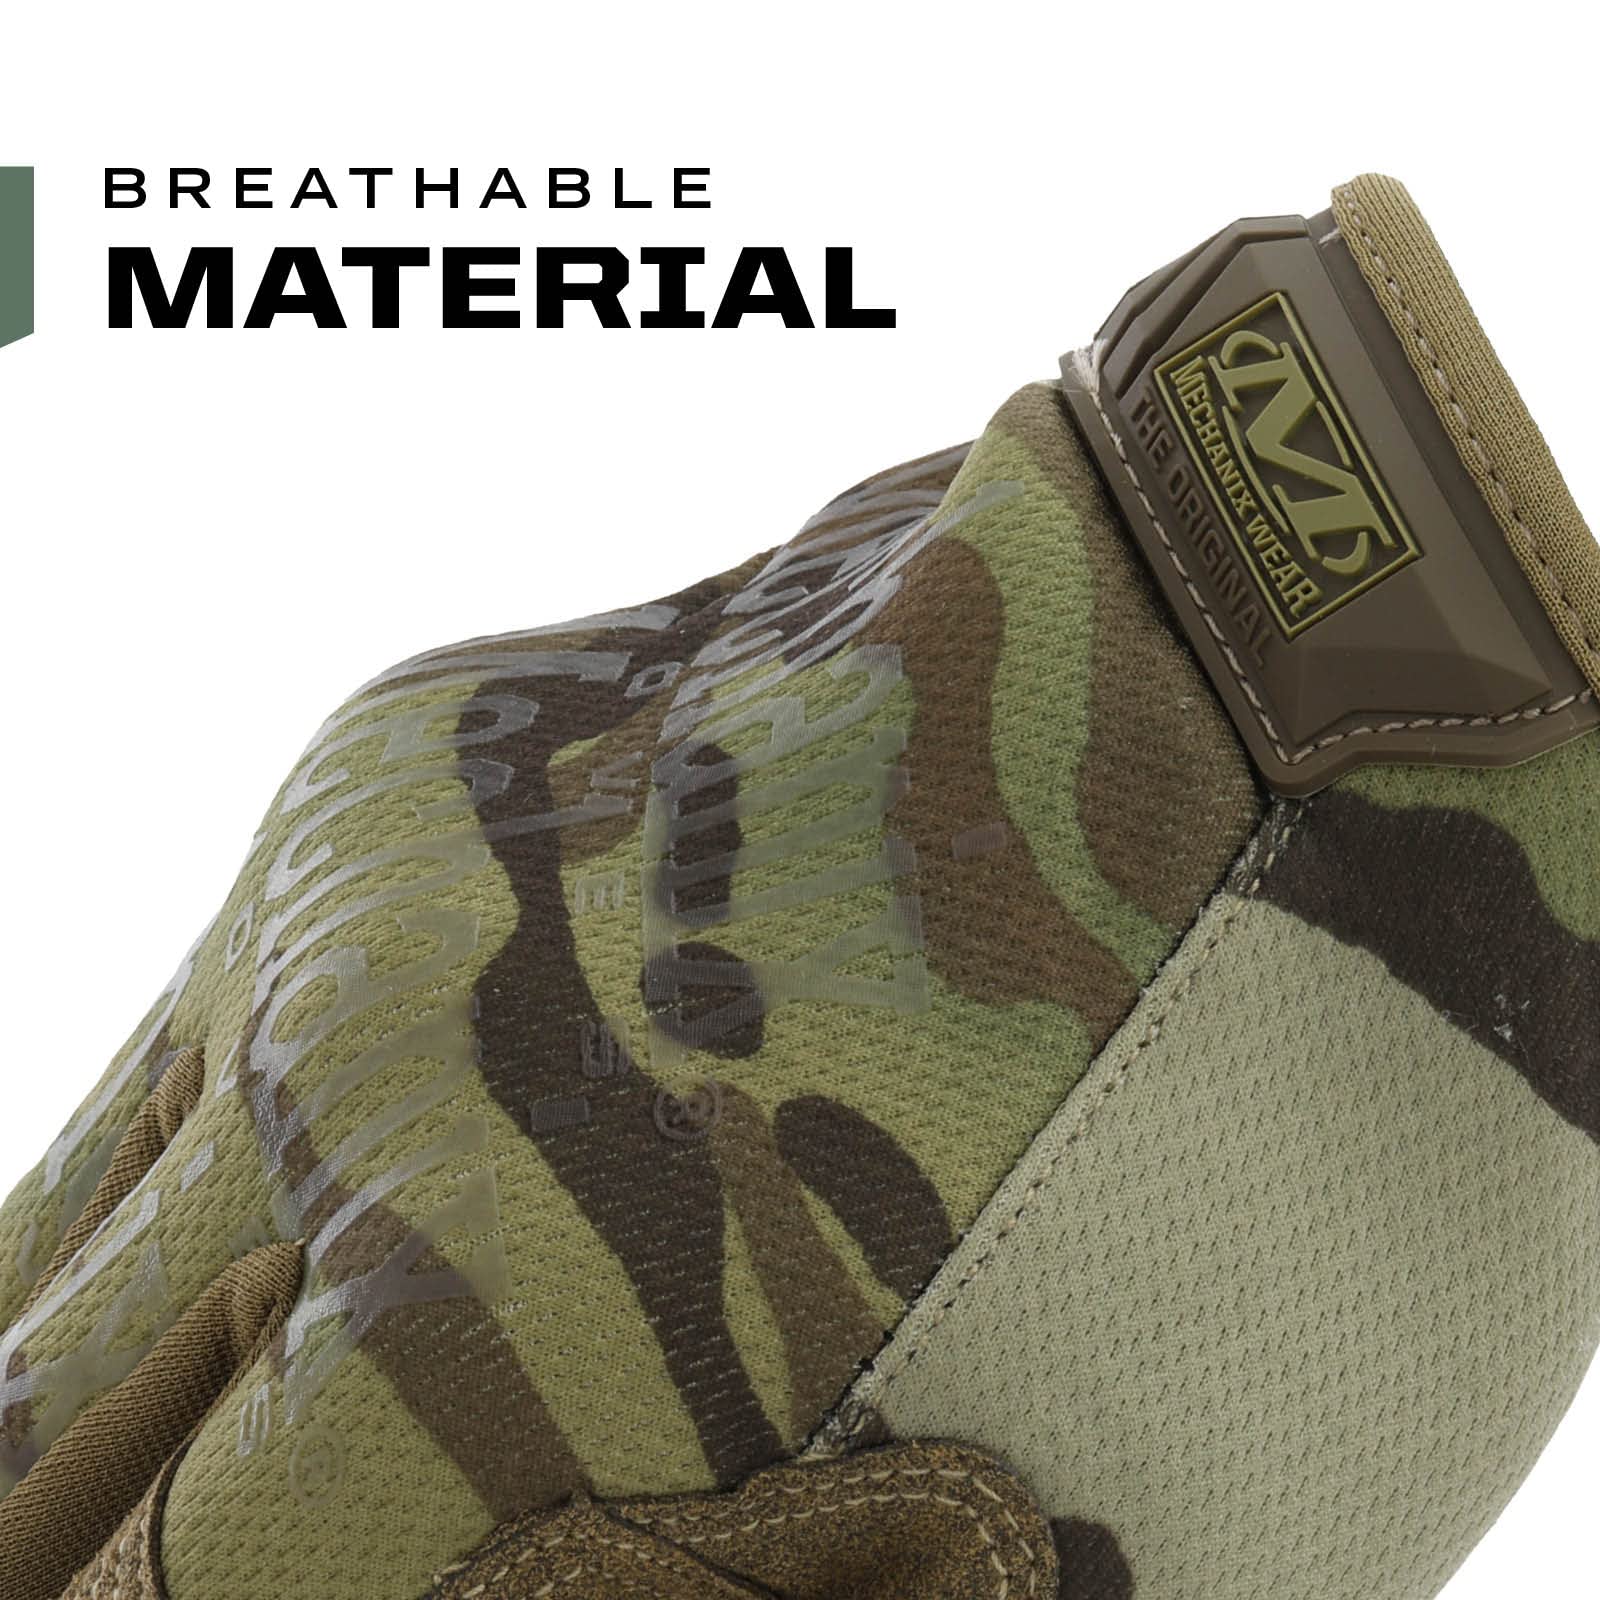 Mechanix Wear: The Original Tactical Work Gloves with Secure Fit, Flexible Grip for Multi-Purpose Use, Durable Touchscreen Safety Gloves for Men (Camouflage - MultiCam, XX-Large)